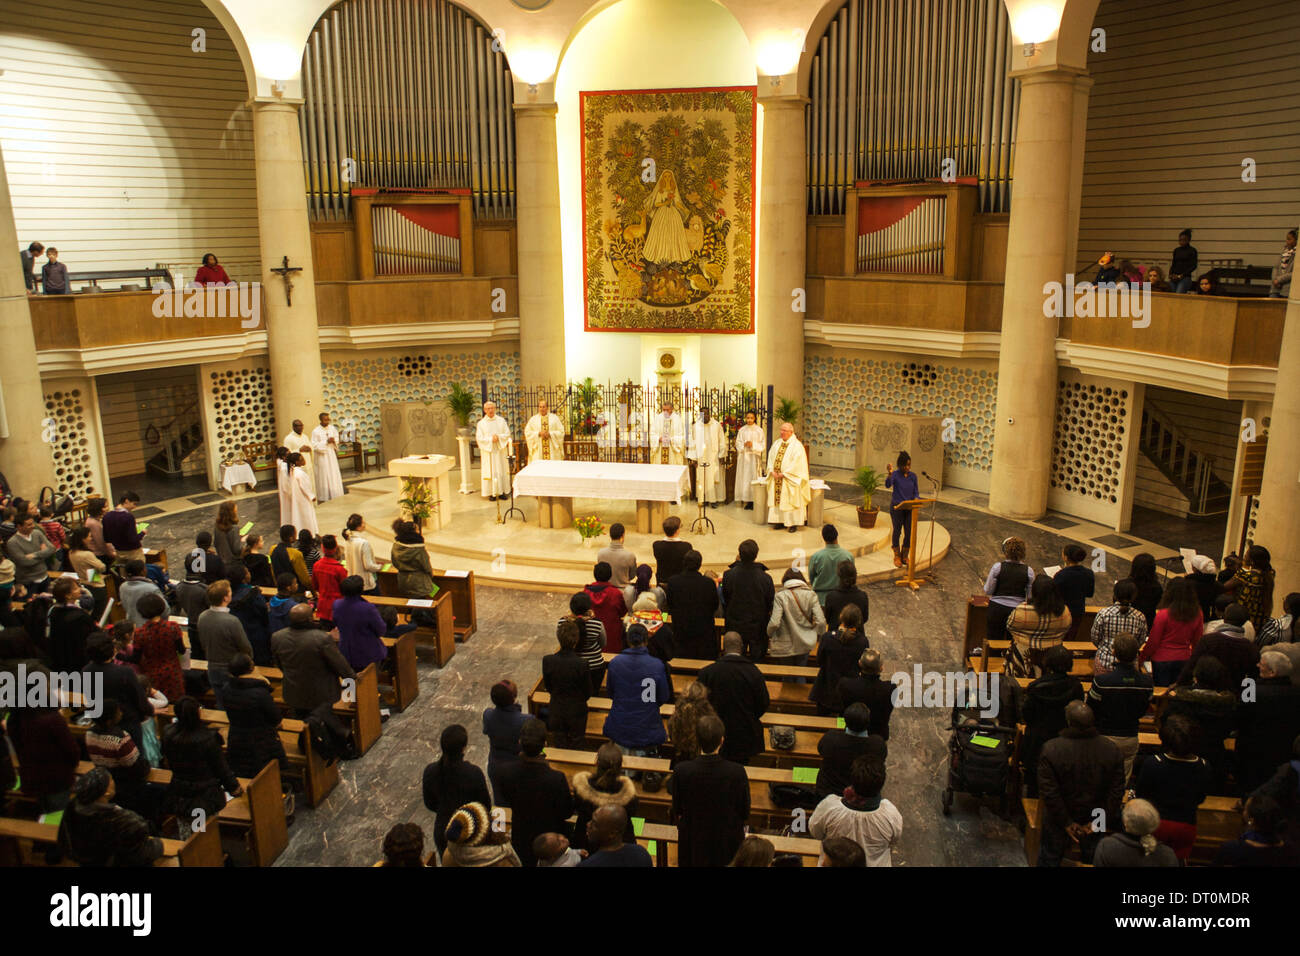 Religious service with priests and congregation in a church in central London: The Roman Catholic Church of Notre Dame De France Stock Photo